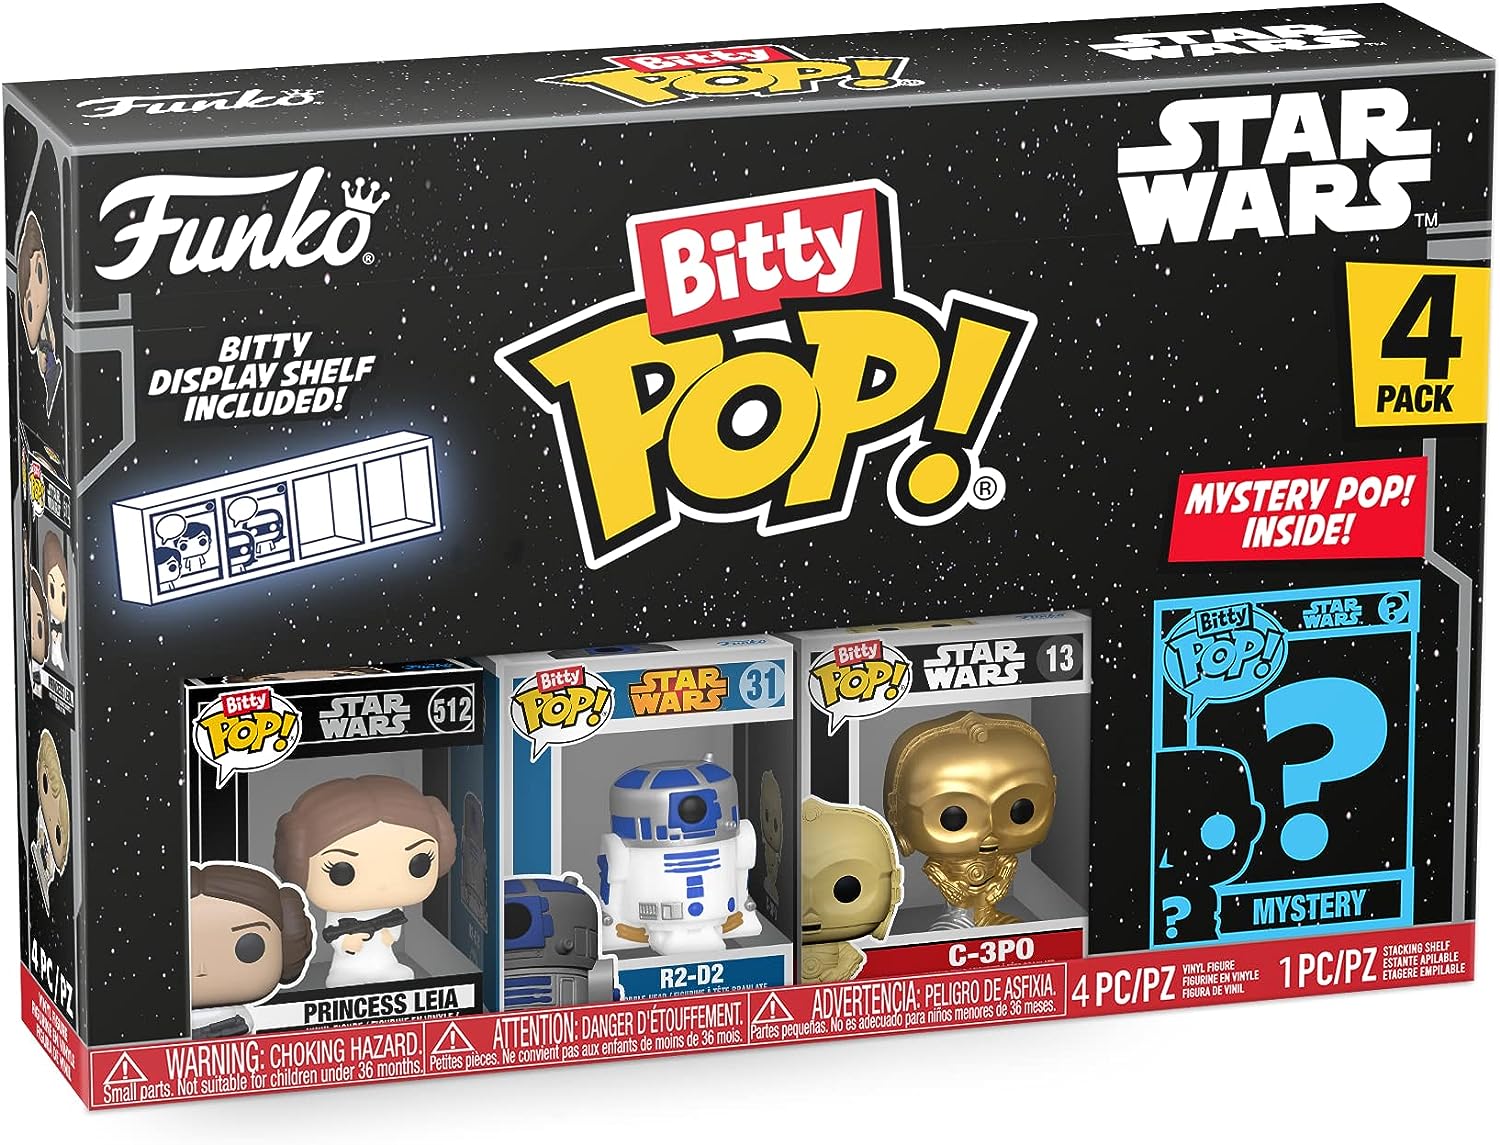 Funko Bitty Pop! Star Wars Mini Collectible Toys 4-Pack - Princess Leia, R2-D2, C-3PO & Mystery Figure